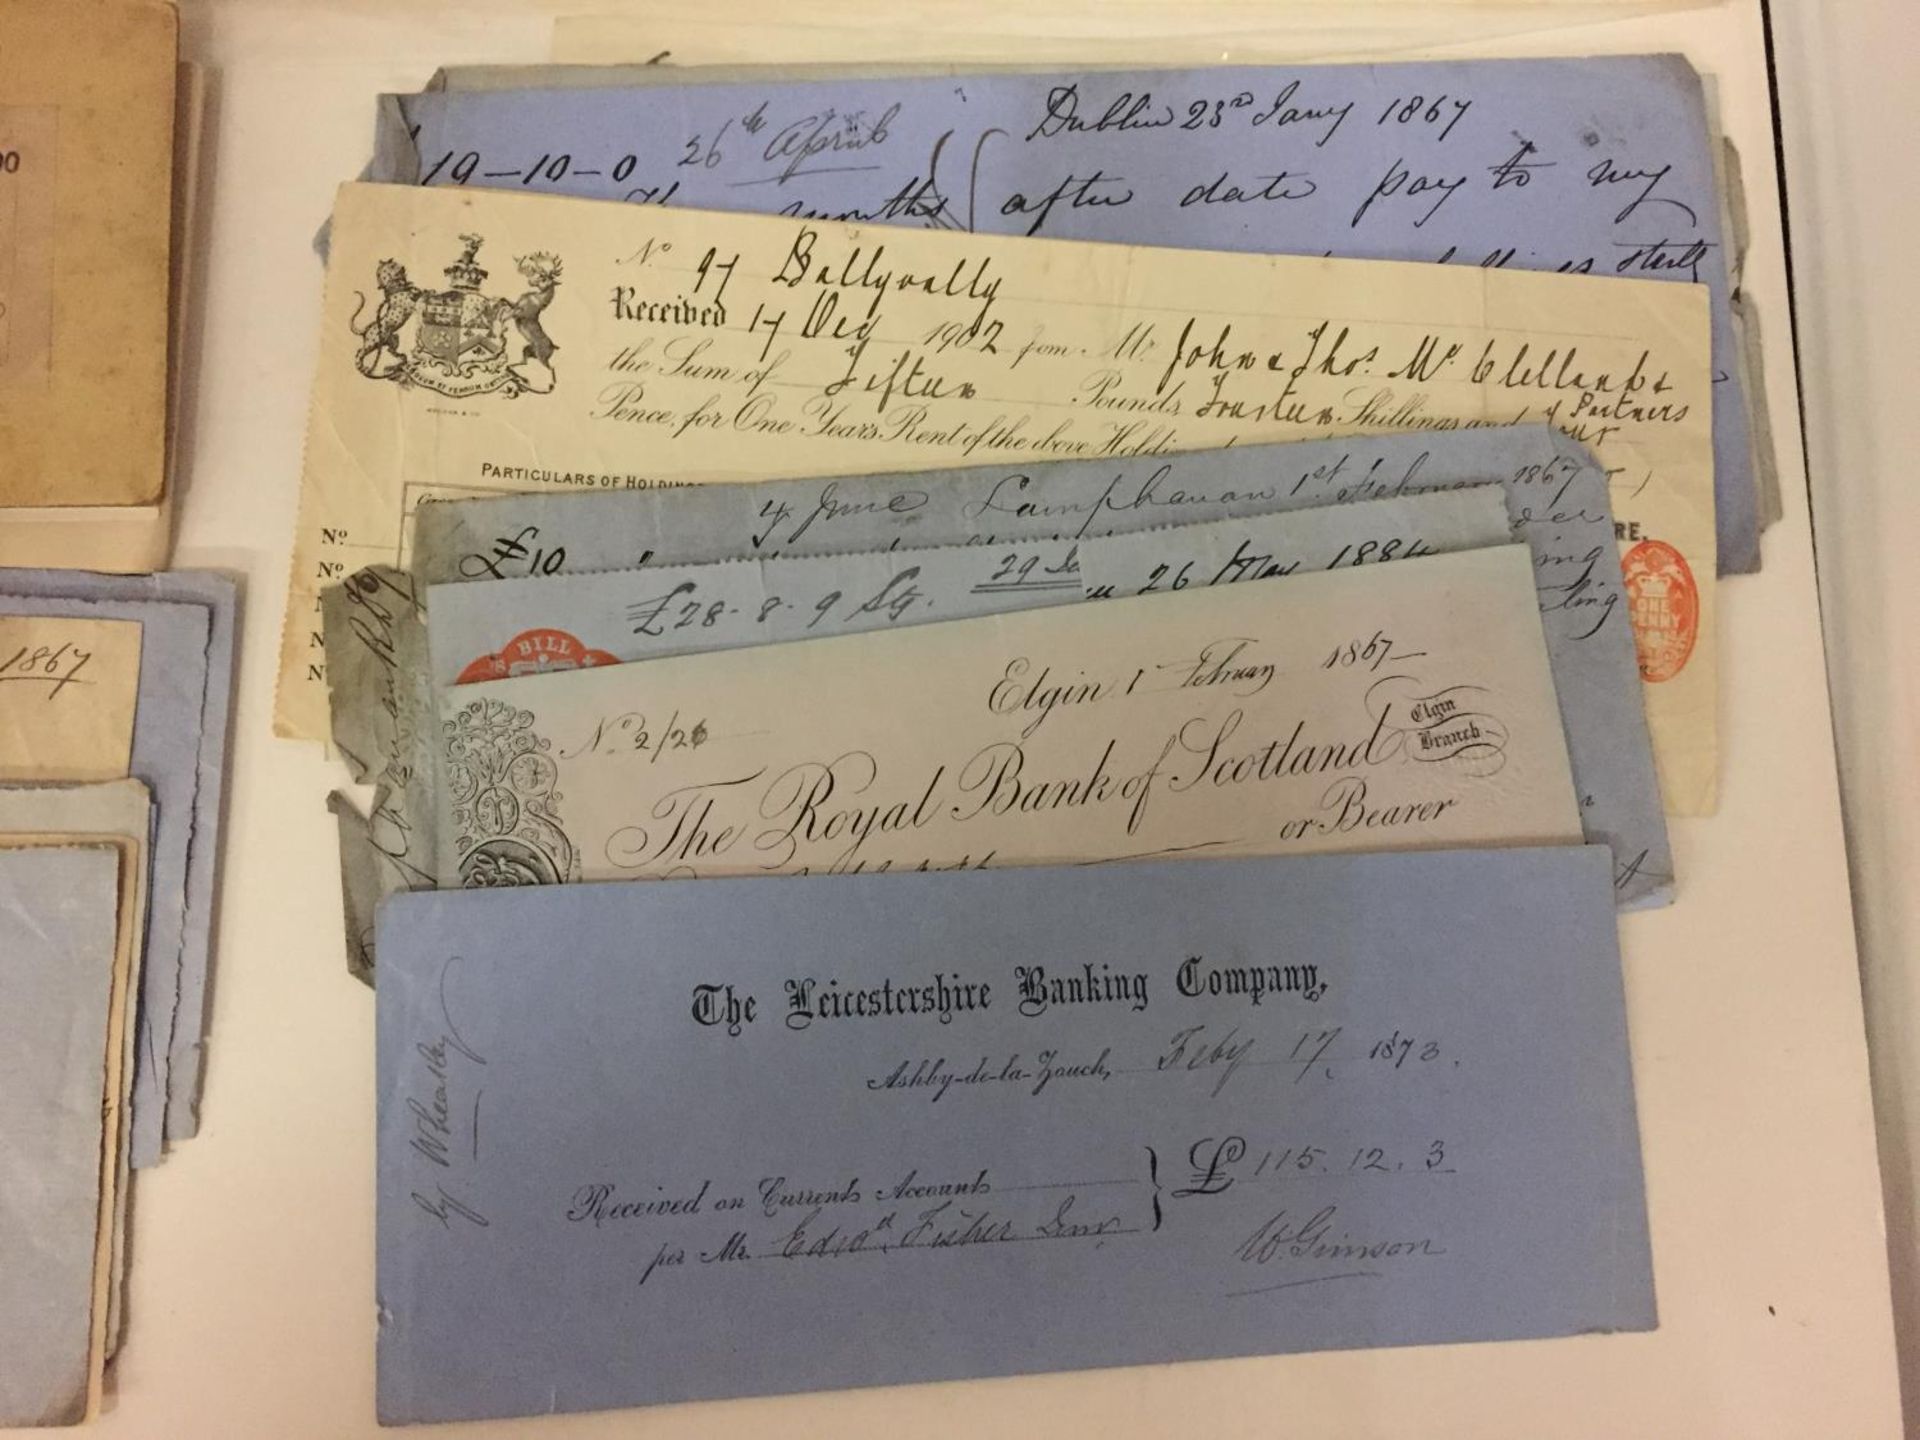 A QUANTITY OF BANKERS DRAUGHTS, CHEQUE STUBS 1860'S - 1910 AND TWO SHARE CERIFICATES NEW YORK 1969 - Image 10 of 12